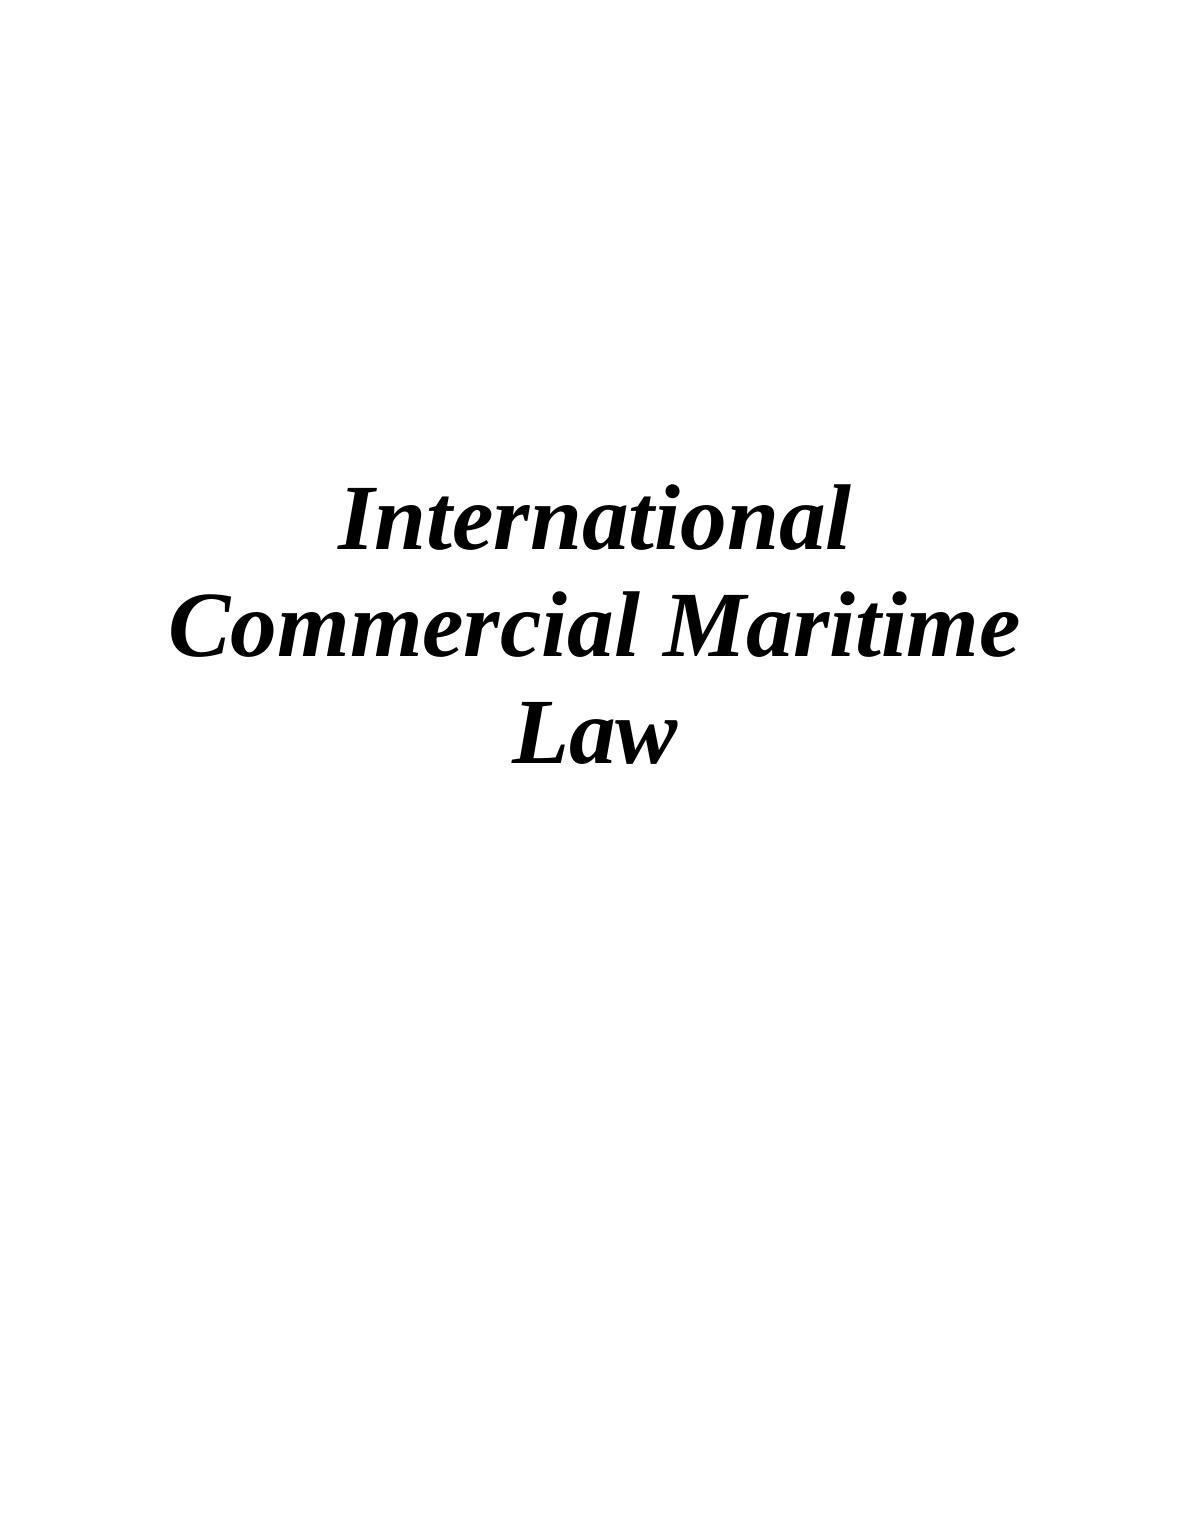 International Commercial Maritime Law_1